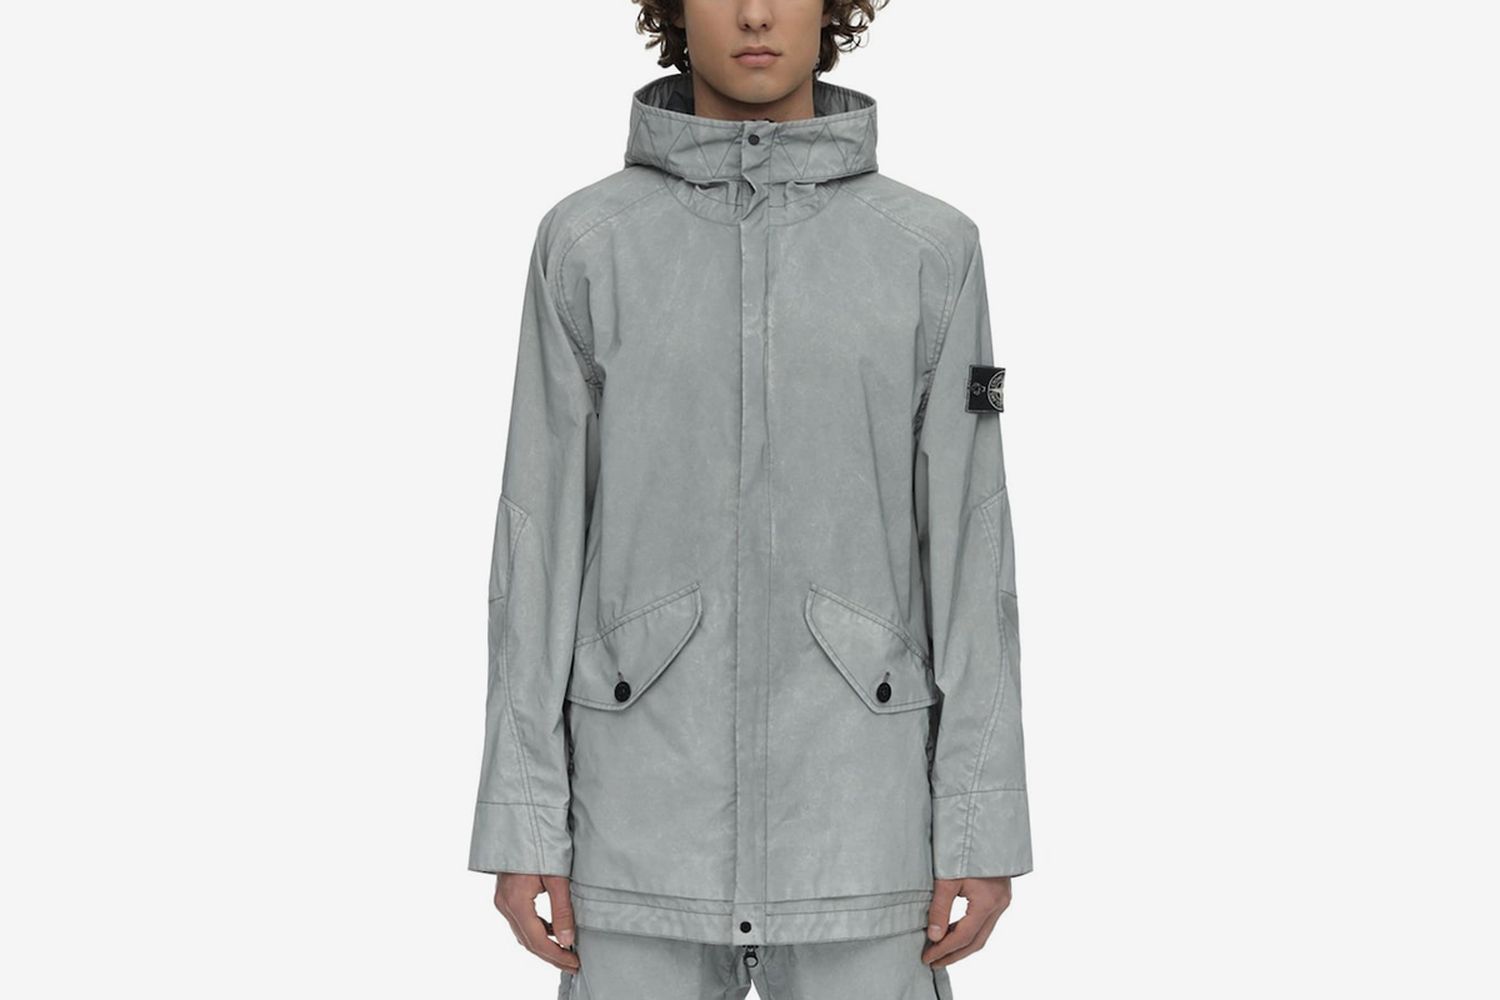 LVR Exclusive Coated Reflective Parka